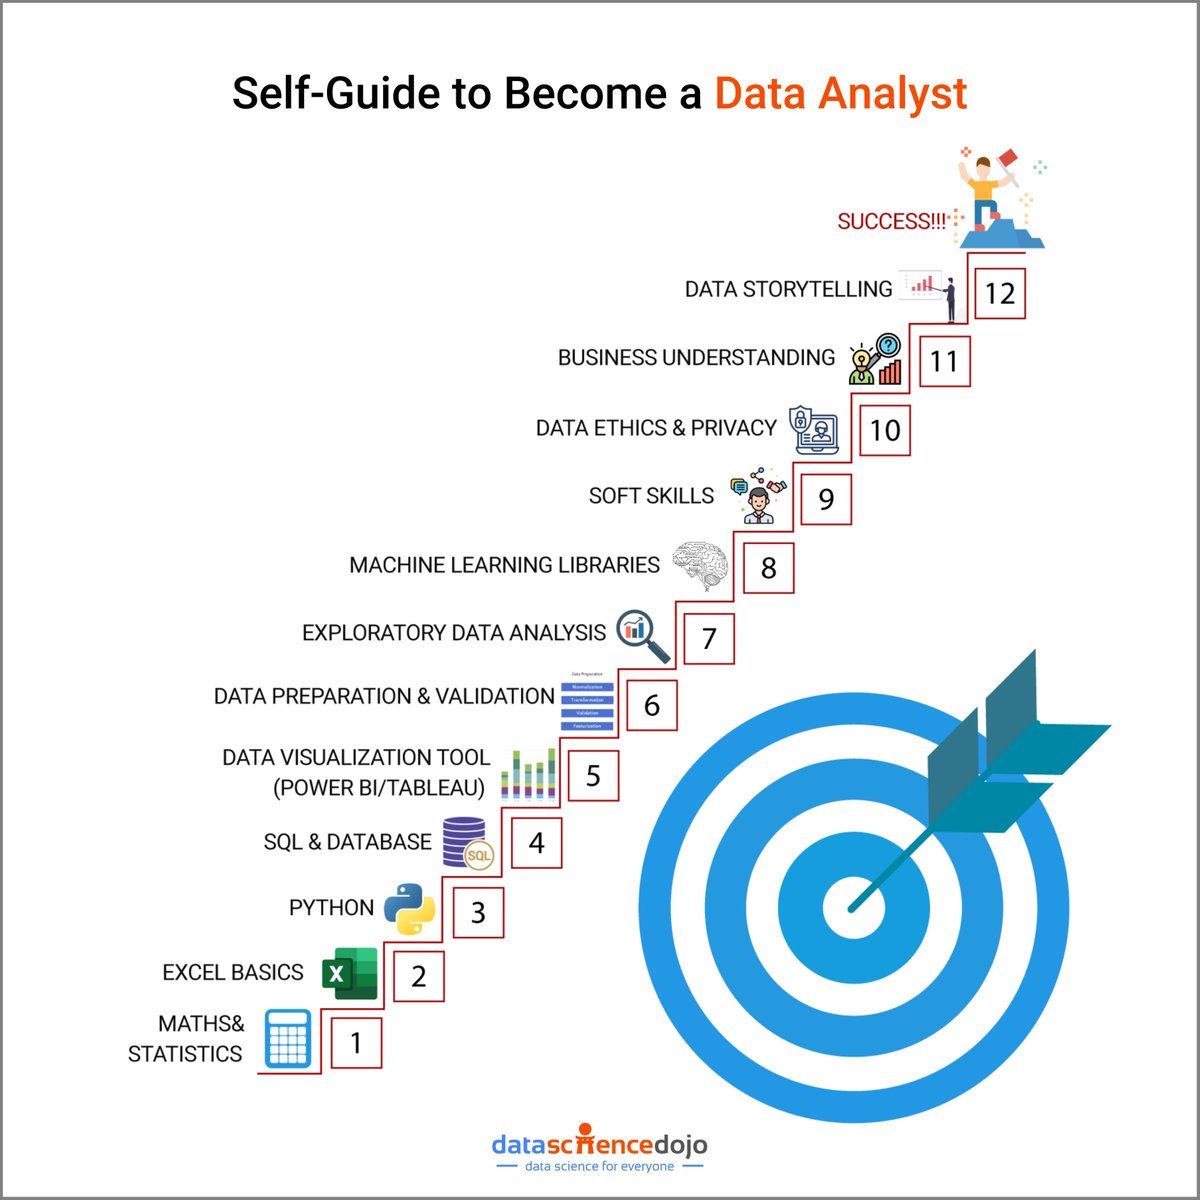 Become a Data Analyst (Without the Mystery!) Thinking about a career in data analysis? This guide breaks it down into bite-sized steps. Checkout the full roadmap to becoming a data analyst here: hubs.la/Q02xFY5D0 #DataAnalyst #CareerChange #GetHired